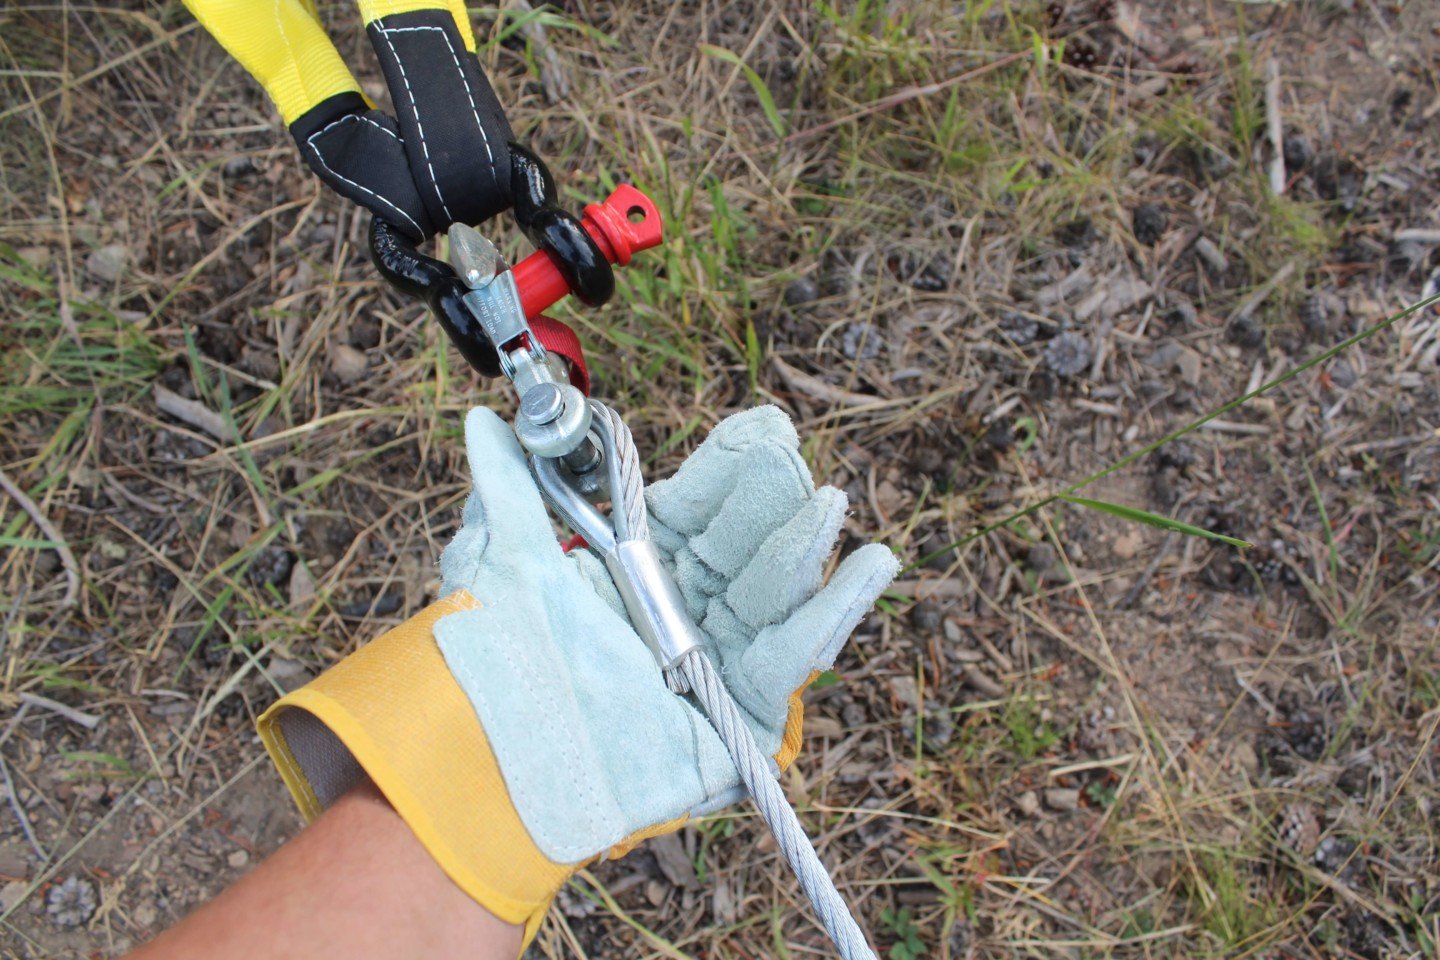 Heavy-duty work gloves are one of those things you never think you'd need when off-roading, until a winch cable decides to eat your hand. Photo Credit: Anvil Off-Road